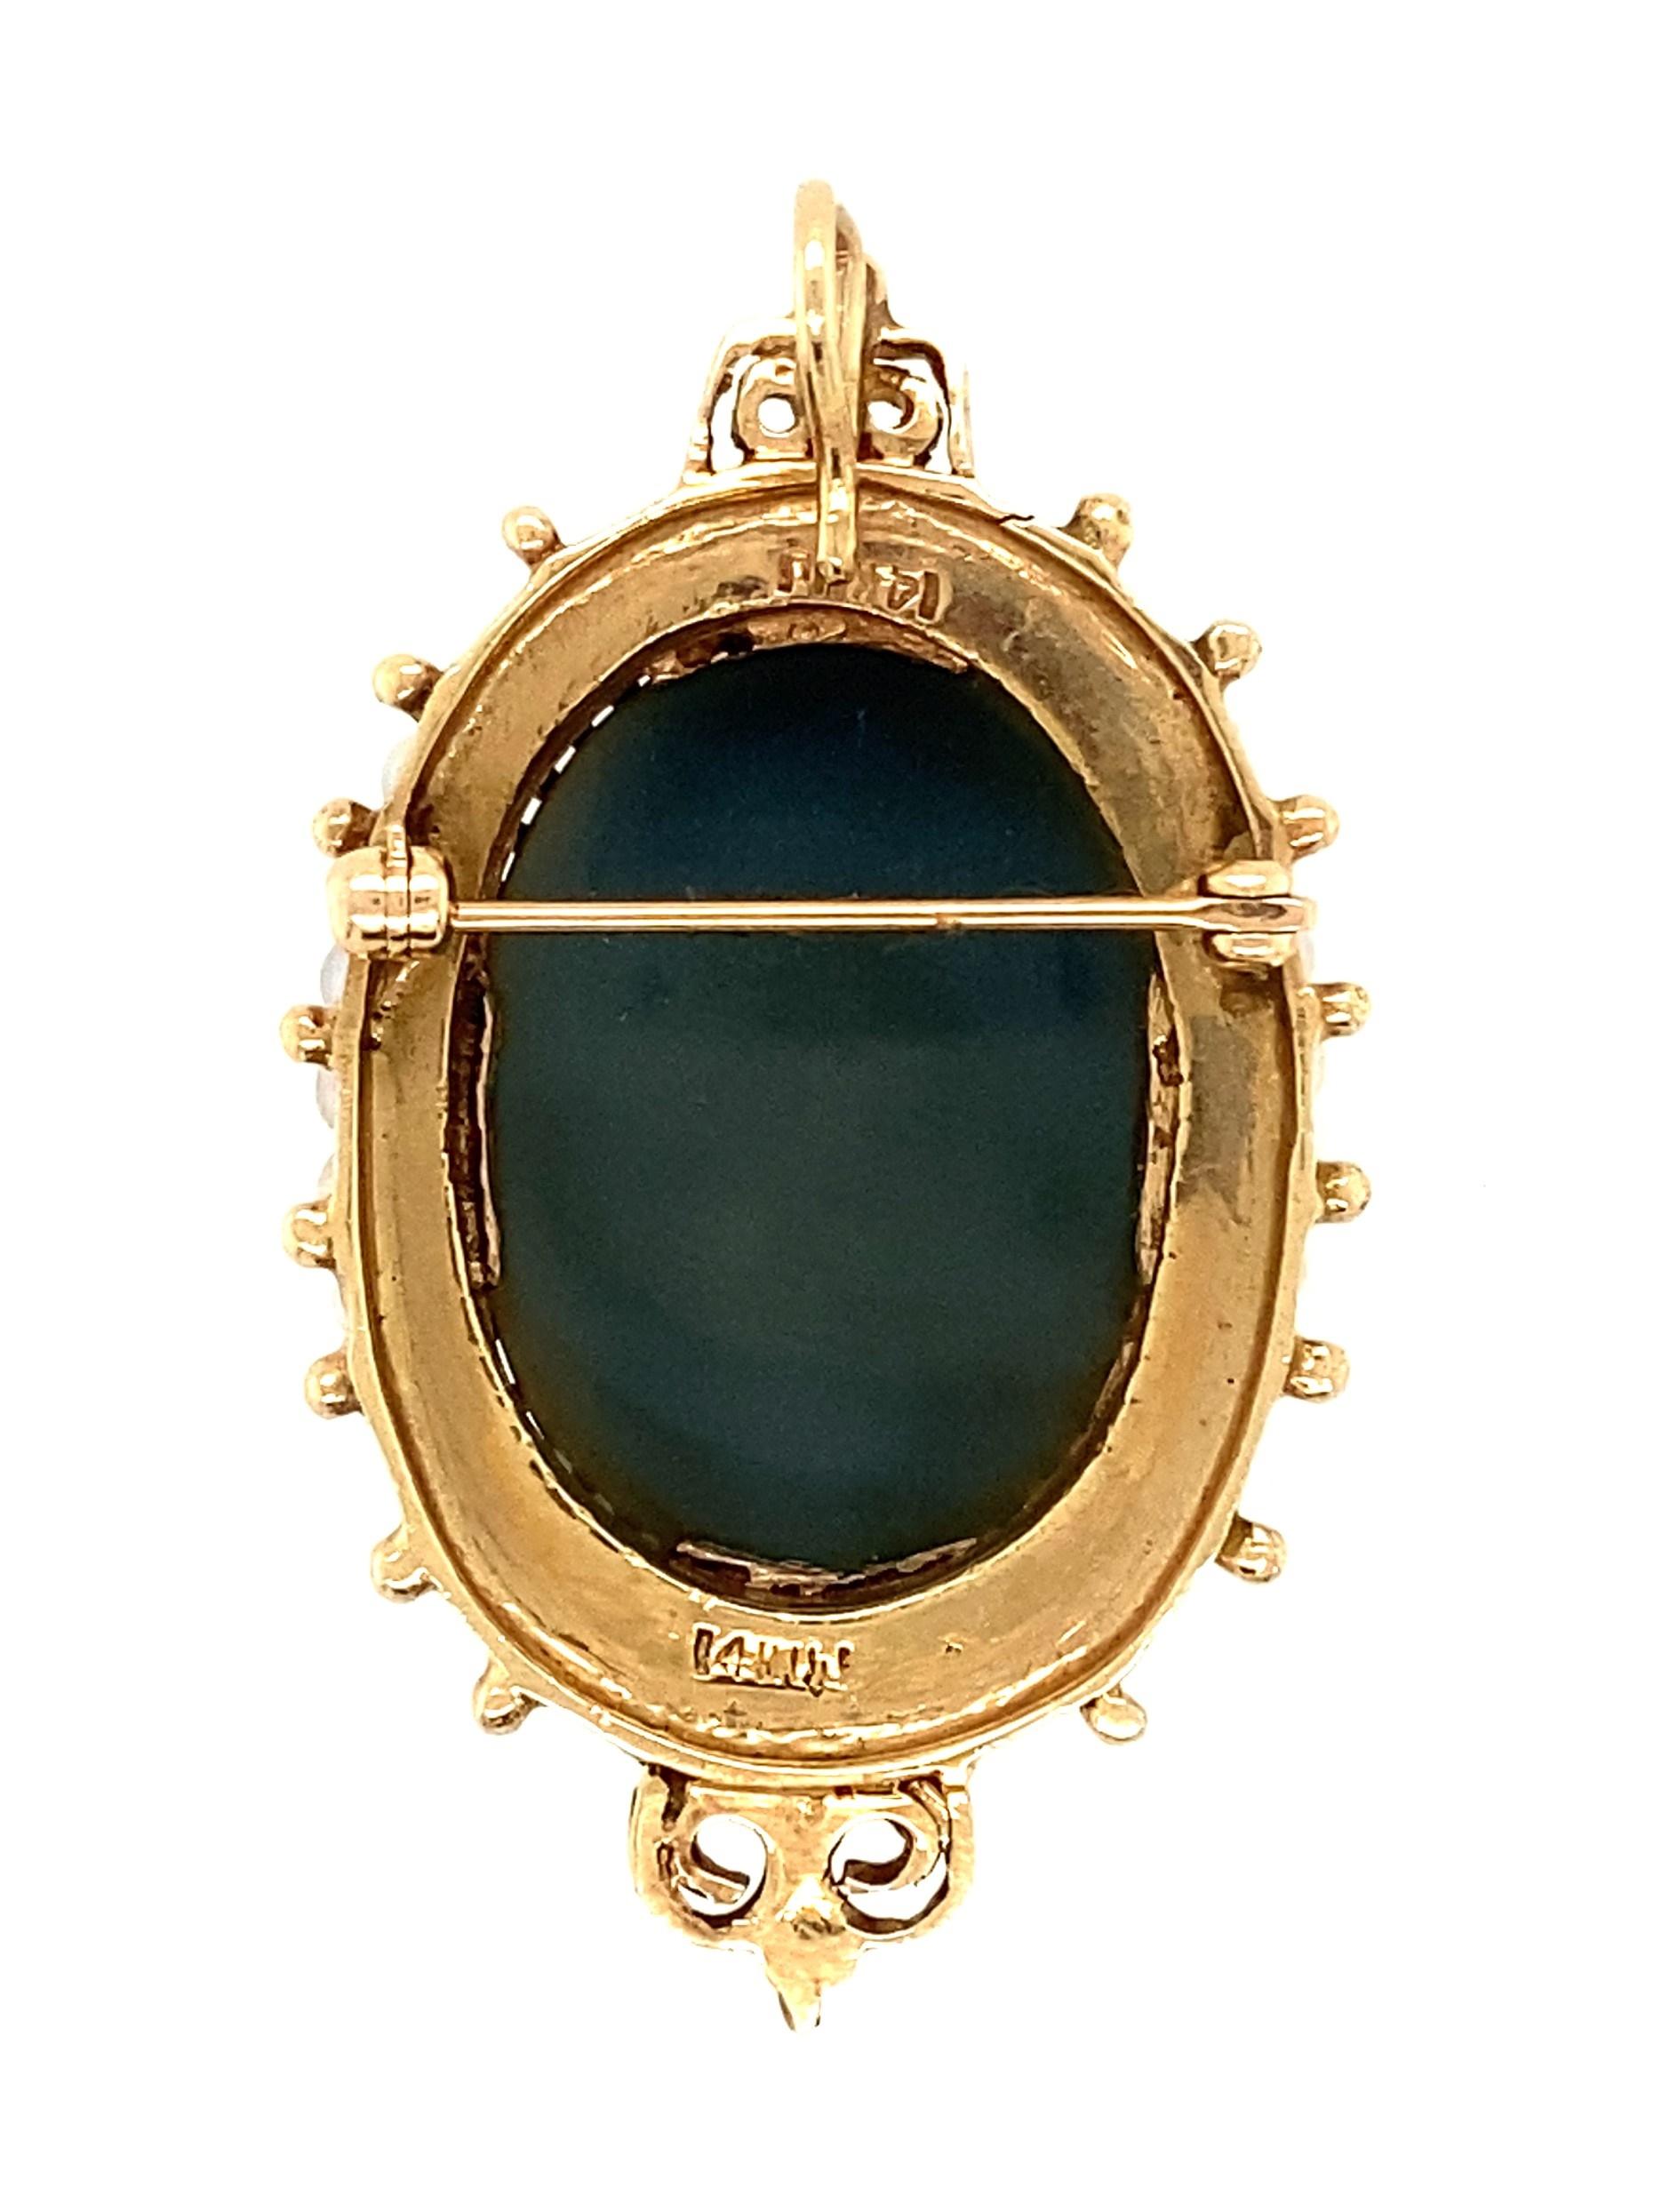 14K Yellow Gold Victorian Revival Hardstone and Pearl Cameo Brooch/Pendant 1960s 1